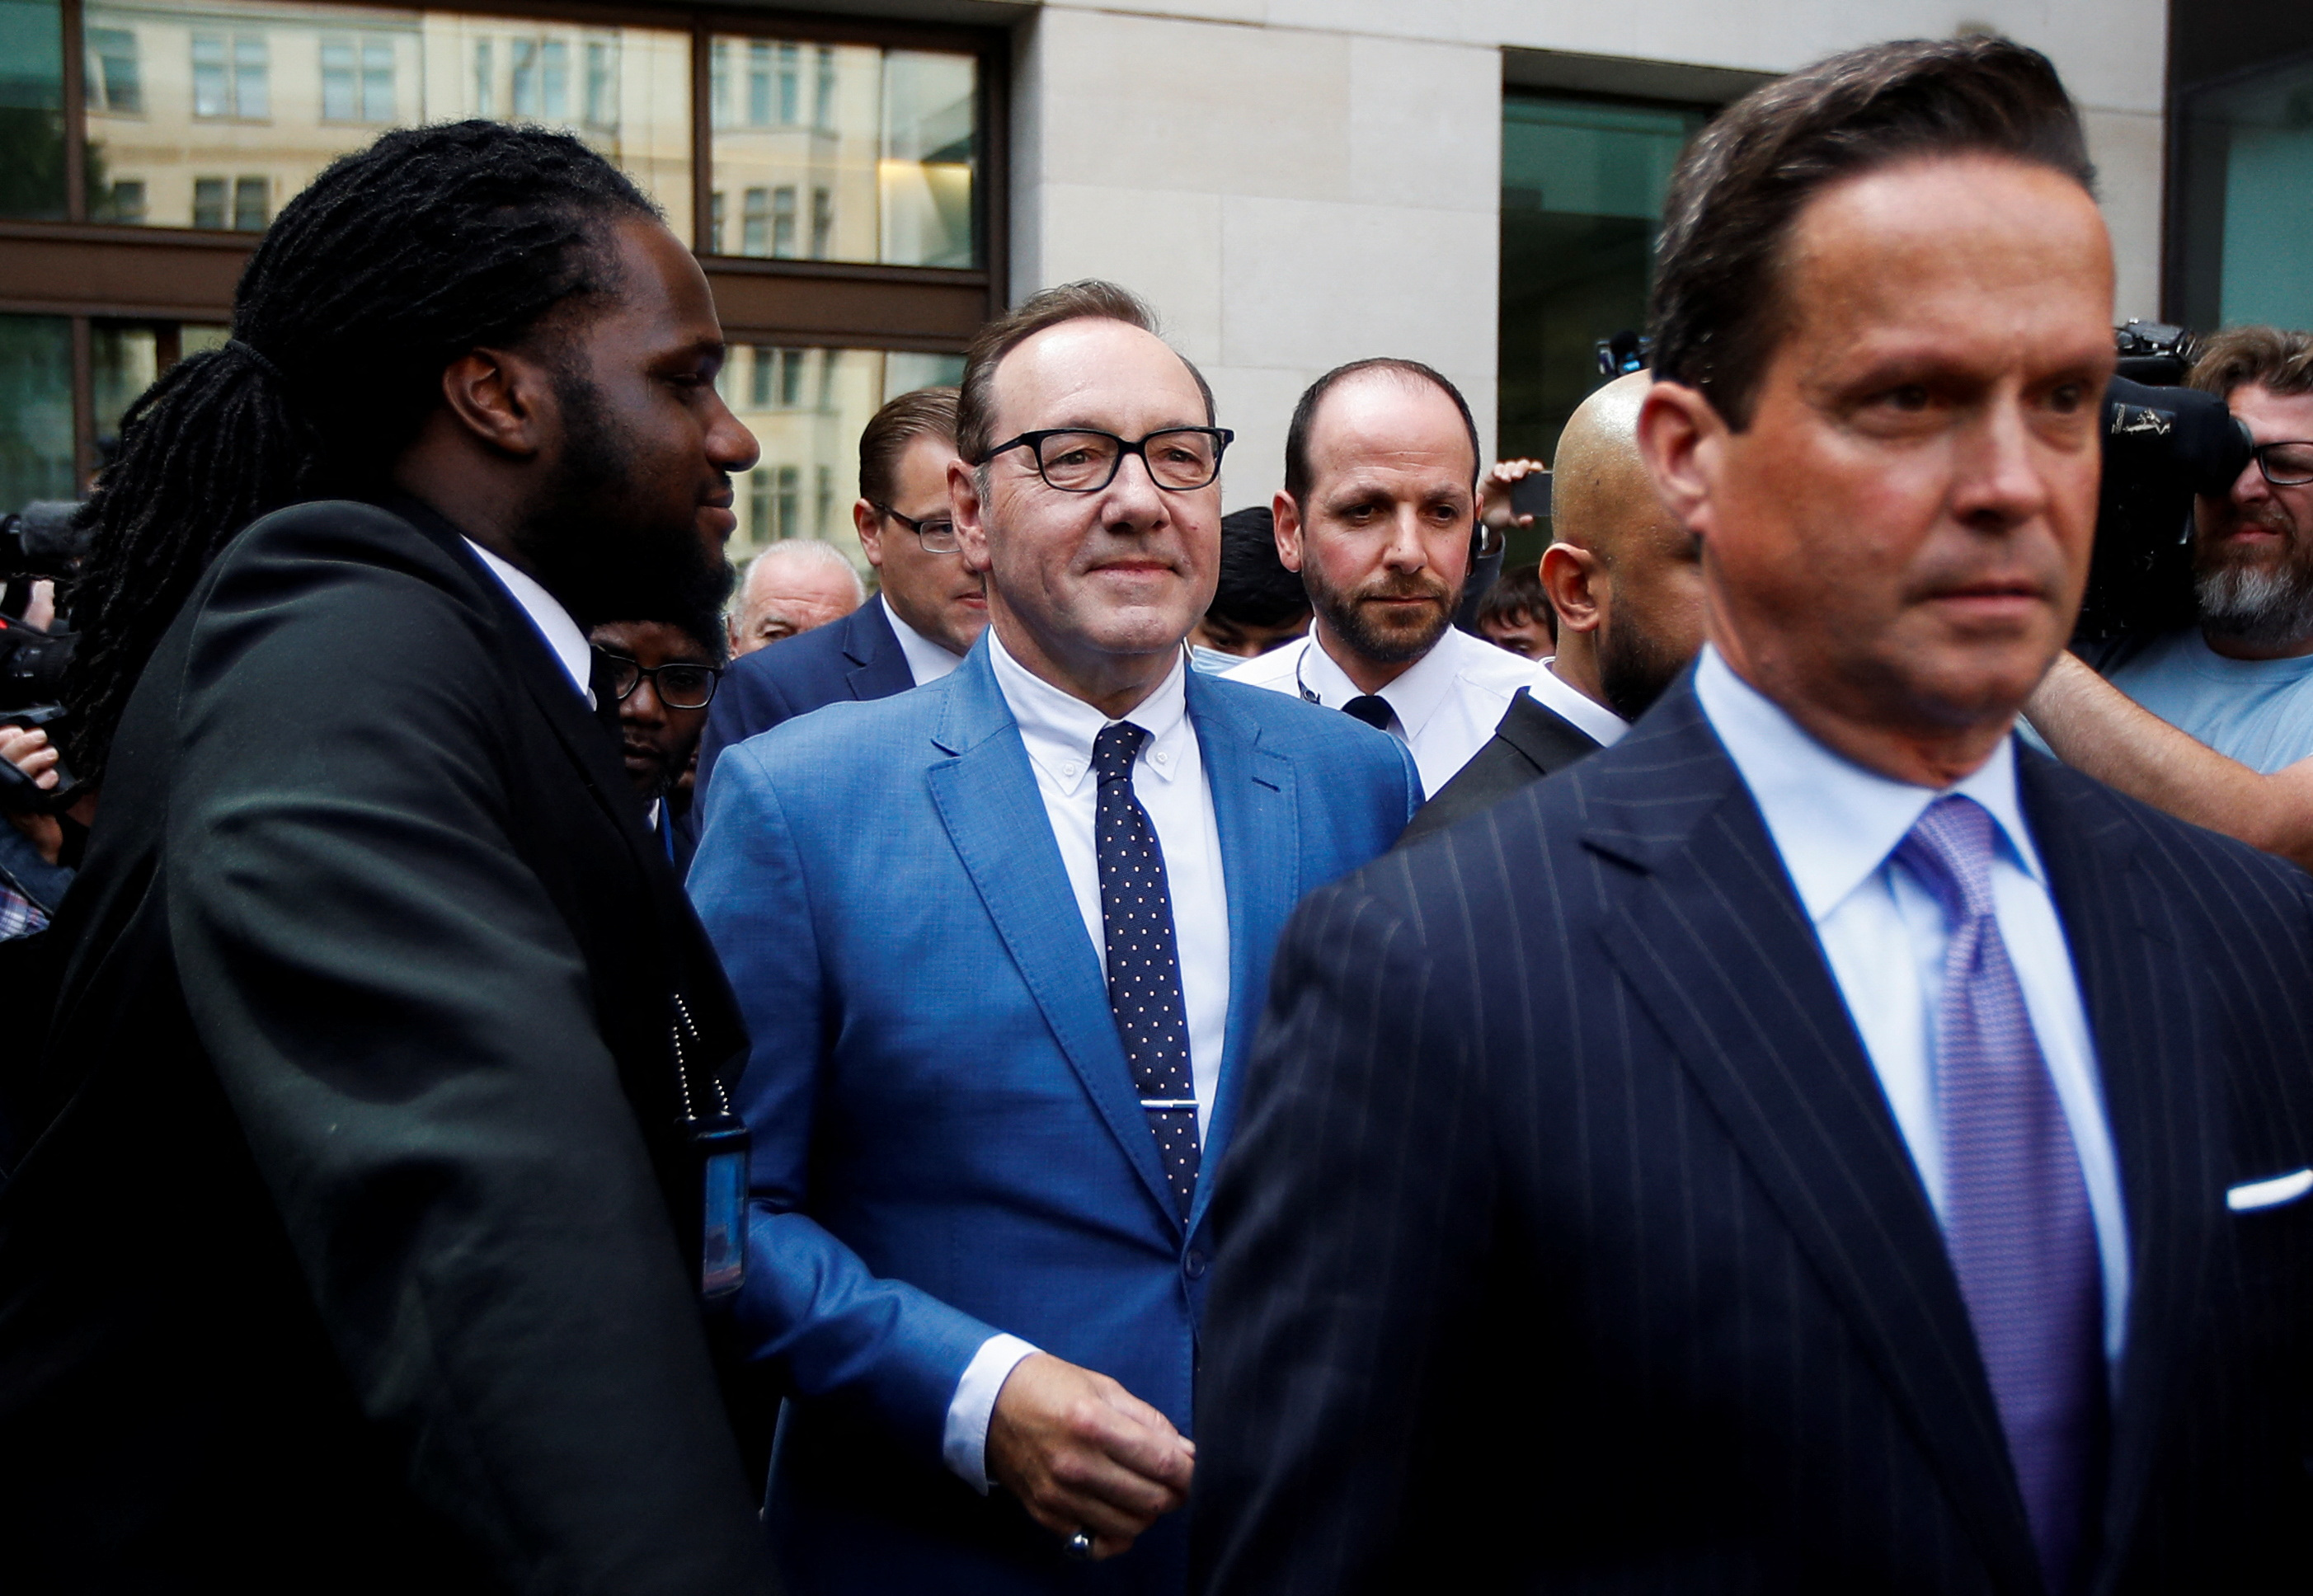 Actor Kevin Spacey leaves from Westminster Magistrates Court in London